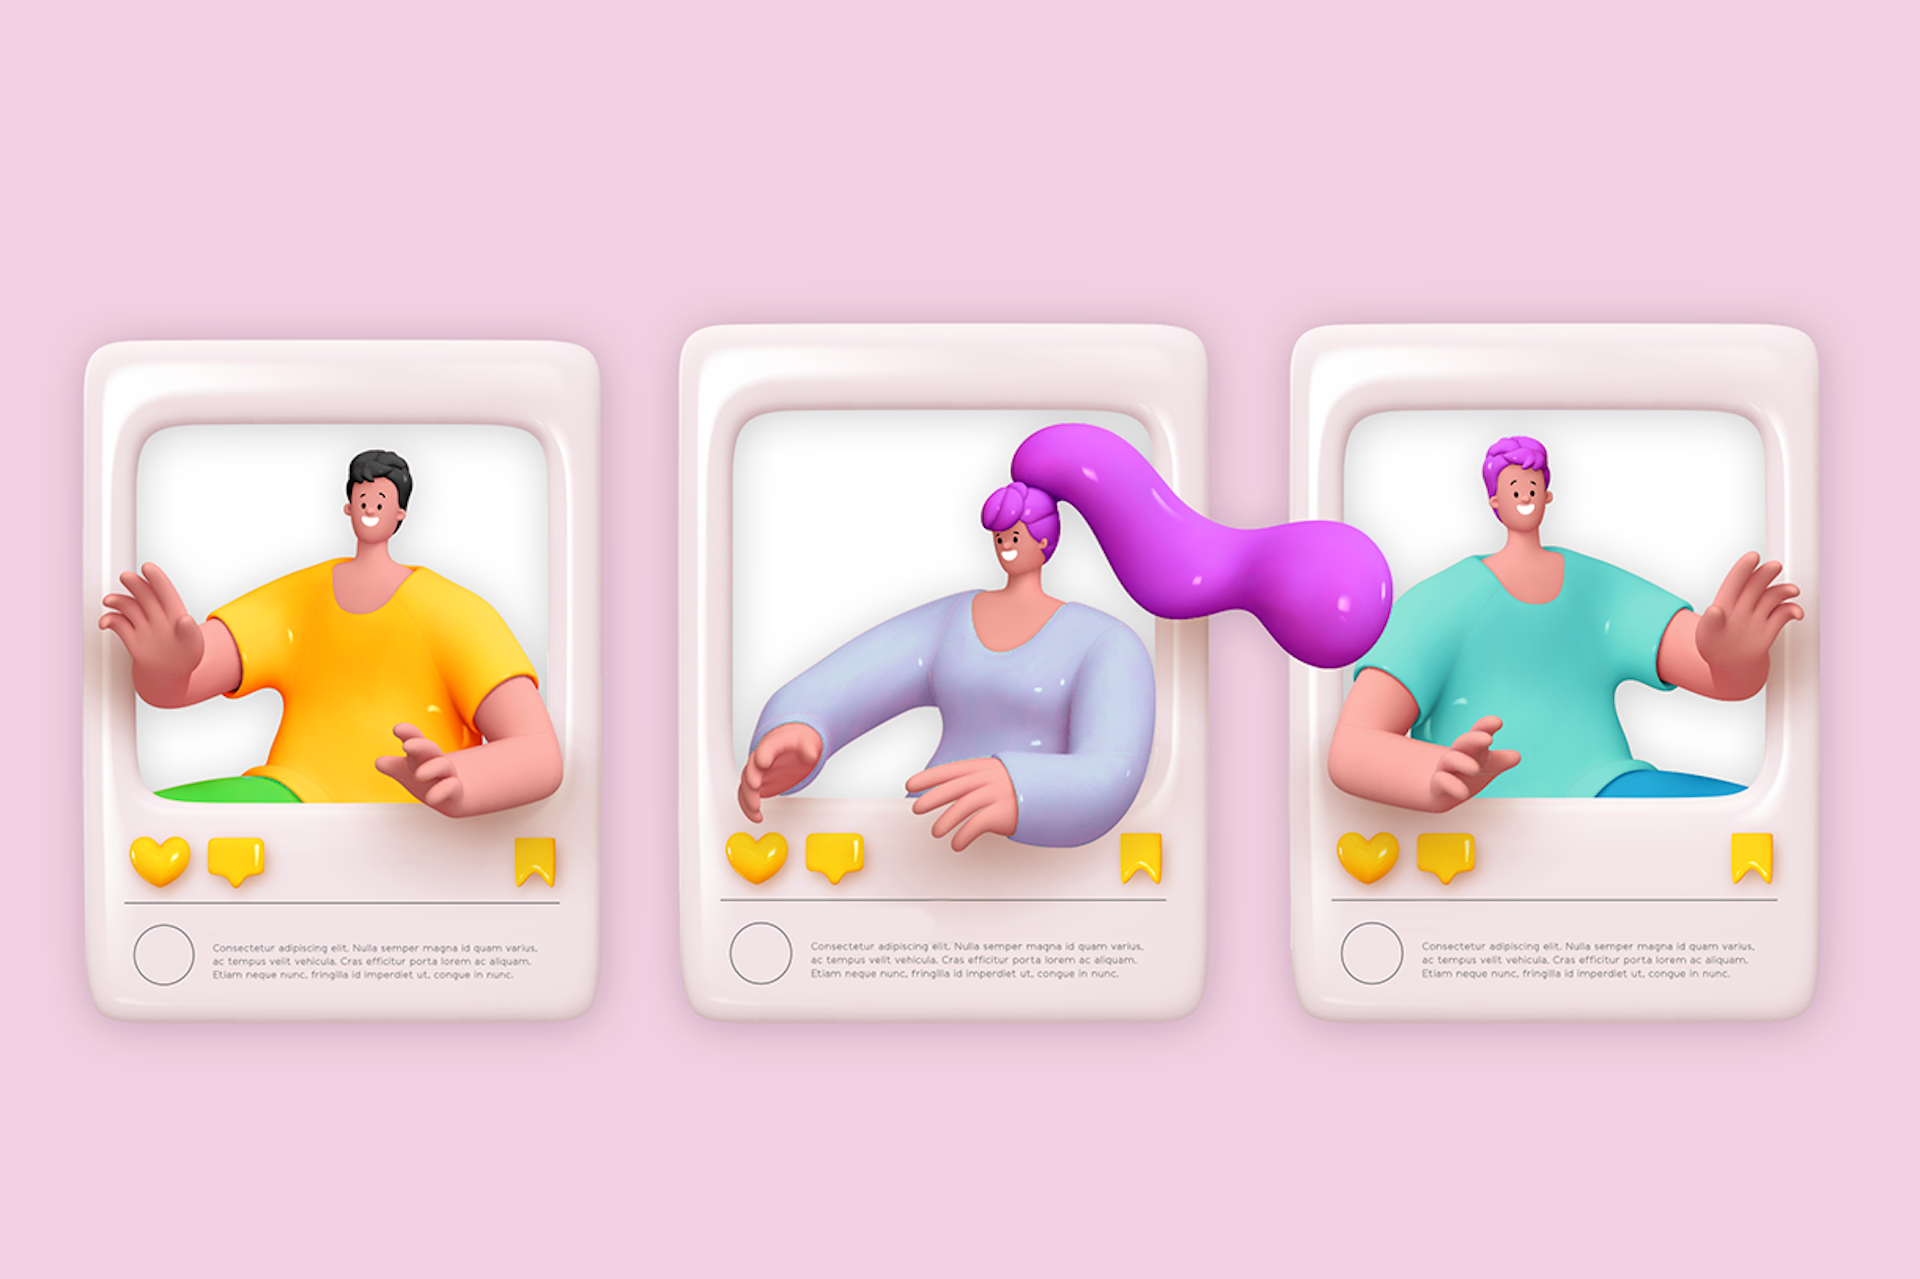 Illustration of three social media influencers in a row, each one popping out of a frame. Each frame looks like an Instagram post with like and comment buttons below the image.